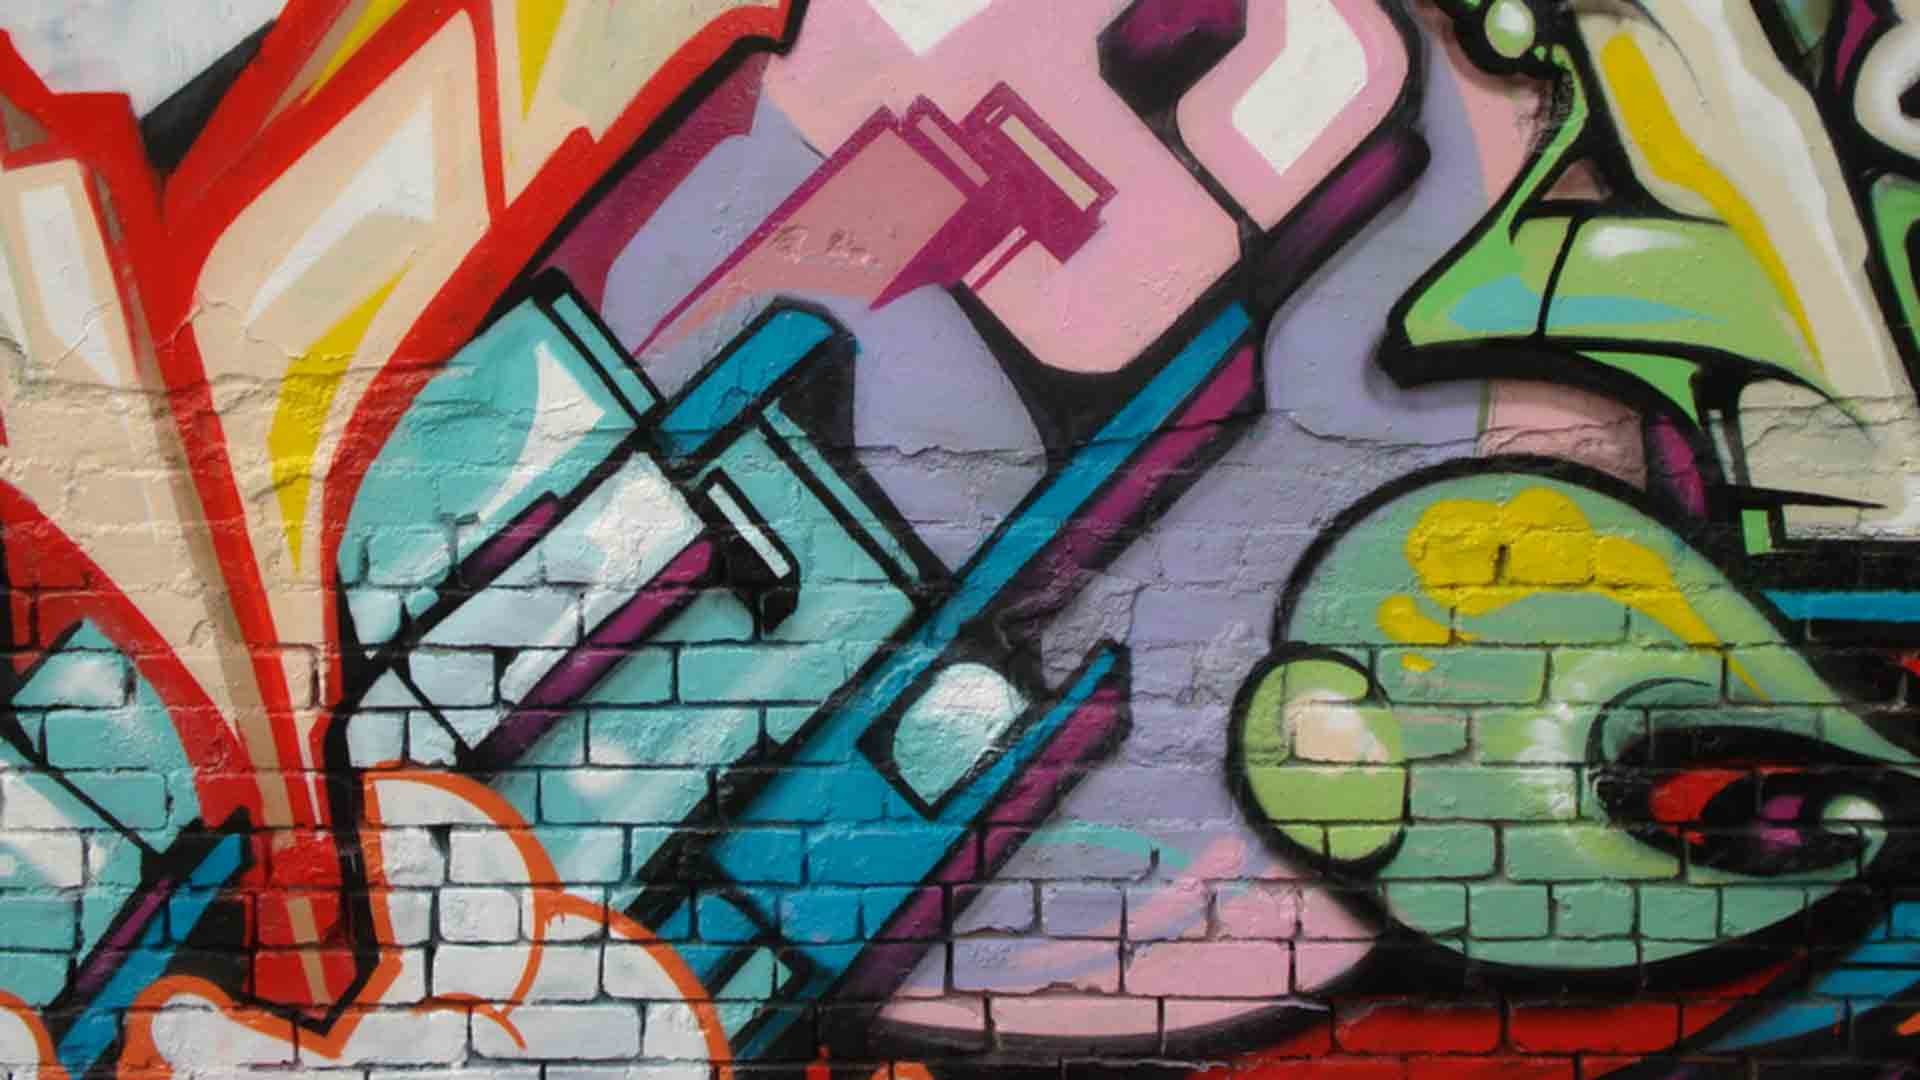 1920x1080 graffiti_wallpapers_9203_awesome_cool_background Image Source.  graffiti_background_wallpapers_3849_awesome_design